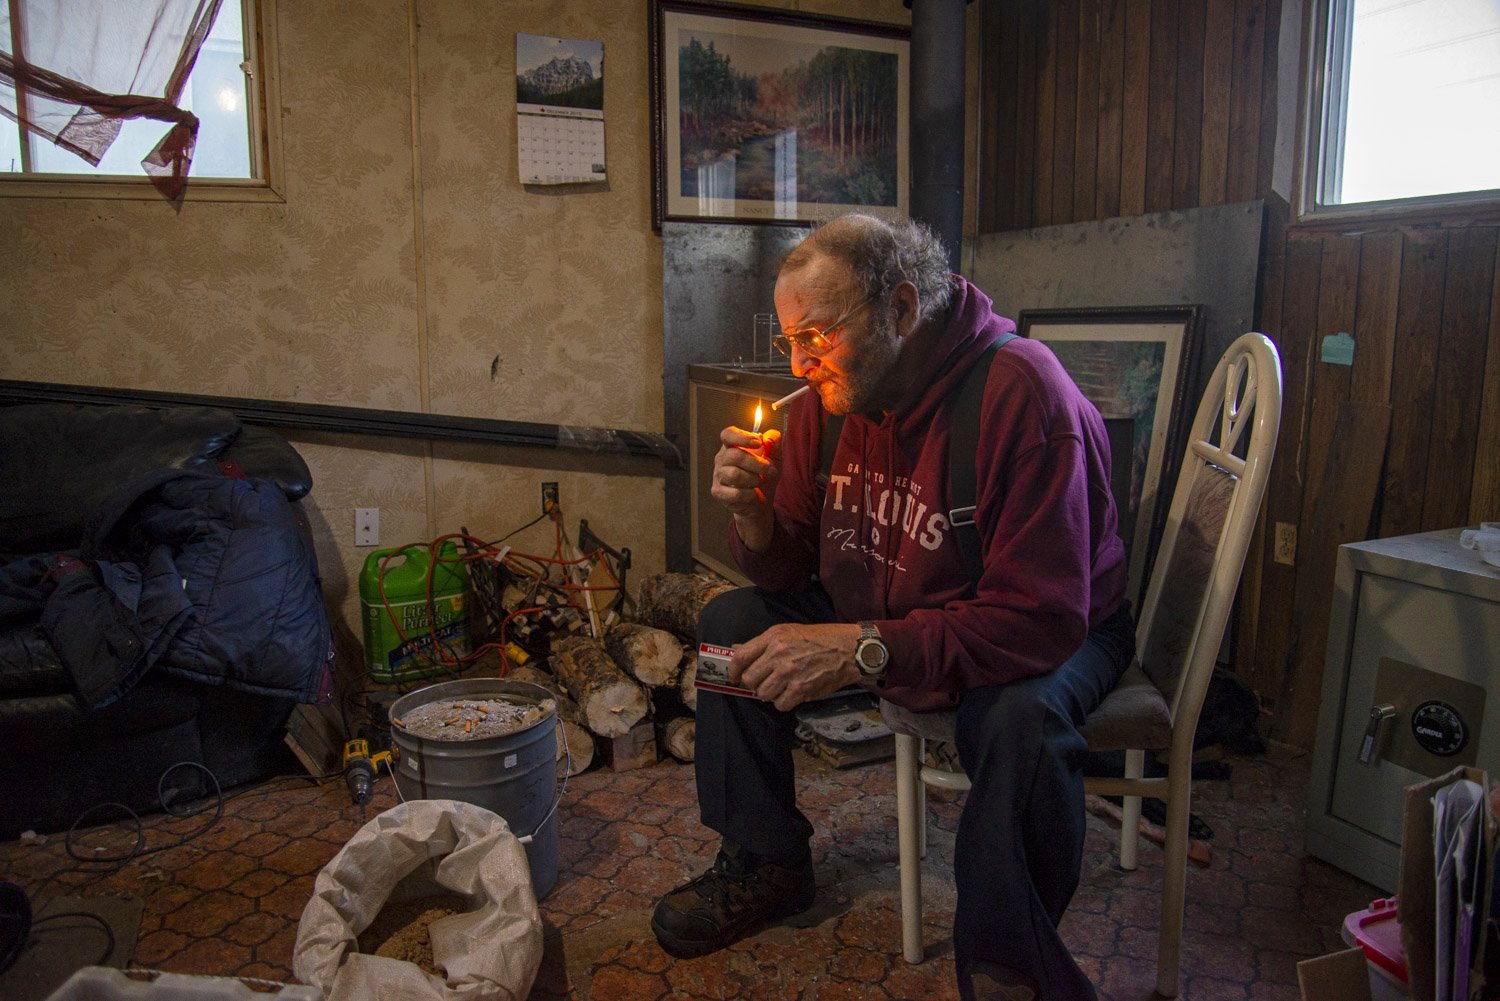  Bill, 70, has been homeless for a few months. He was evicted from the shack he was living in when the owner of the land, where he was staying, passed away suddenly. Now with no fixed address and fragile health, Bill’s future is uncertain. He lives w